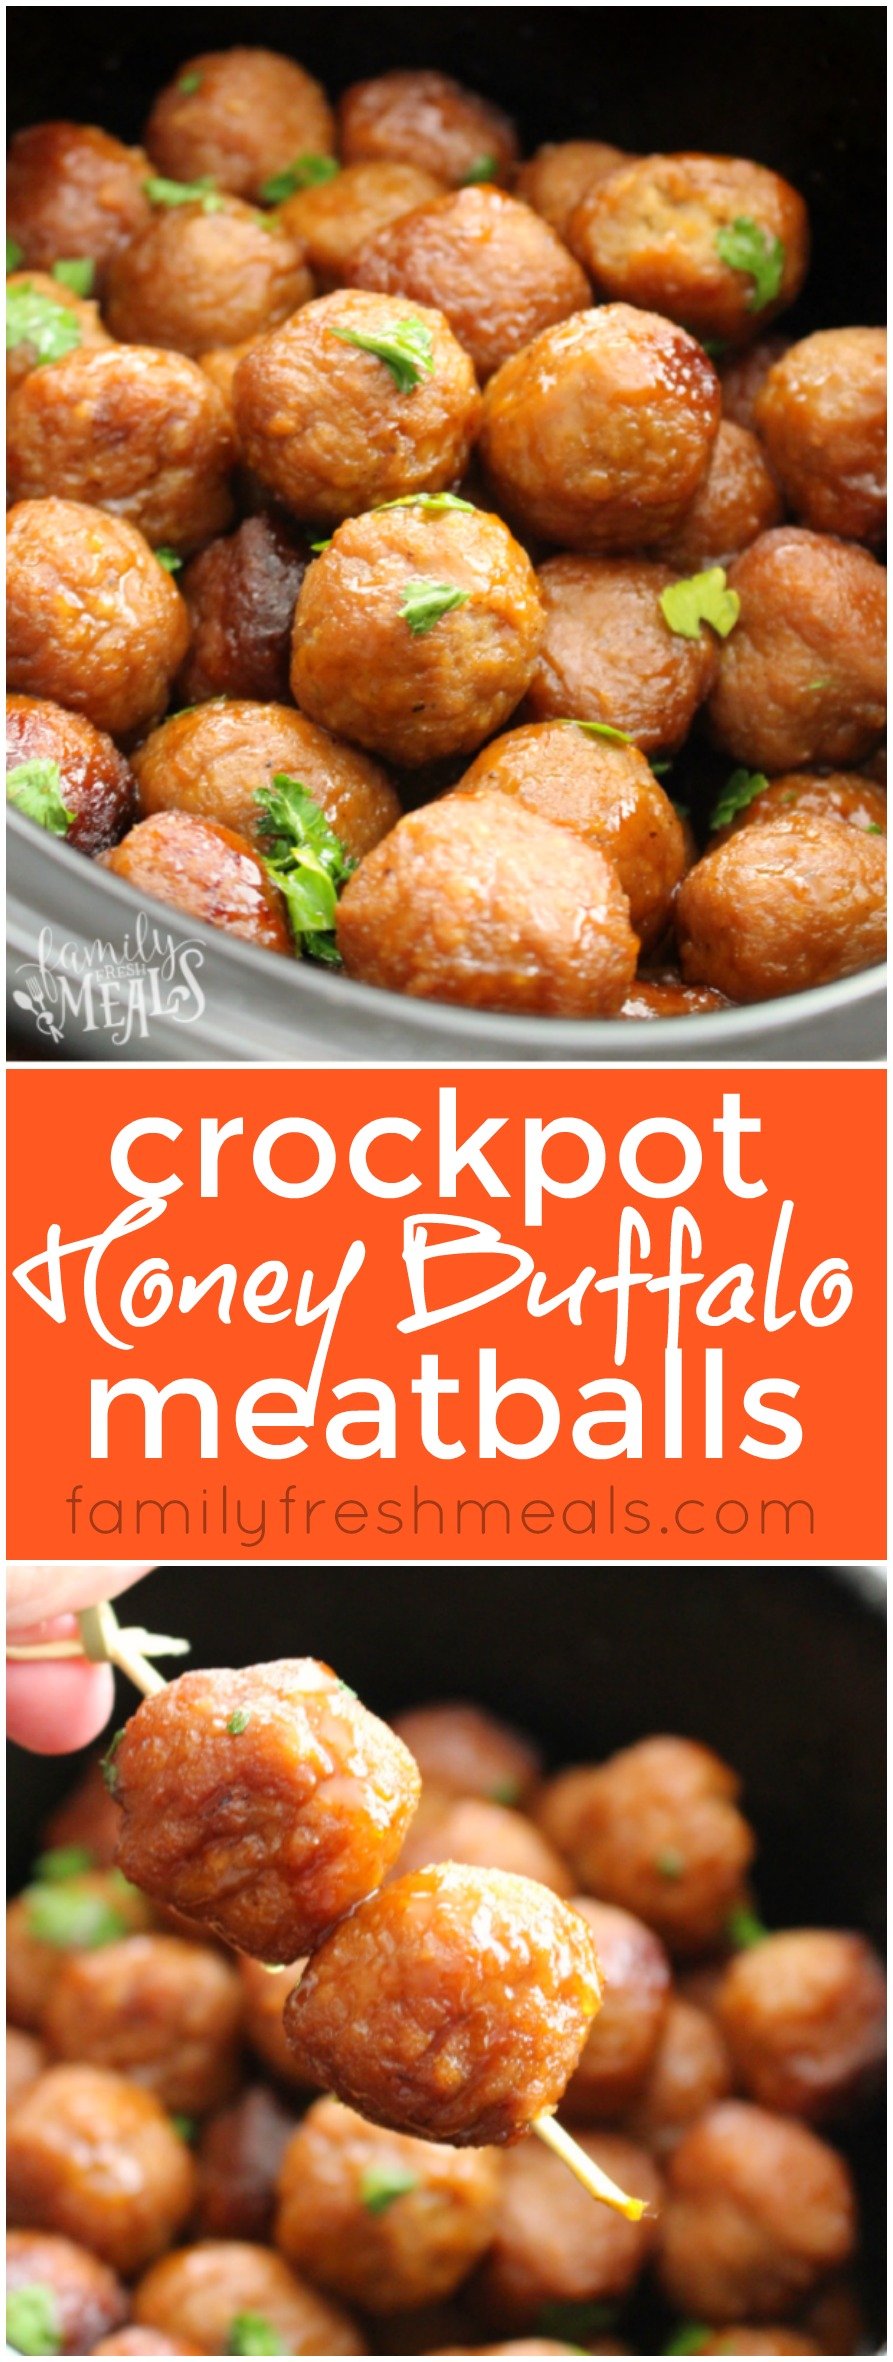 These Honey Buffalo Crockpot Meatballs are a combination of sweet and spicy flavors stands up better to the heartier taste of the beef. via @familyfresh